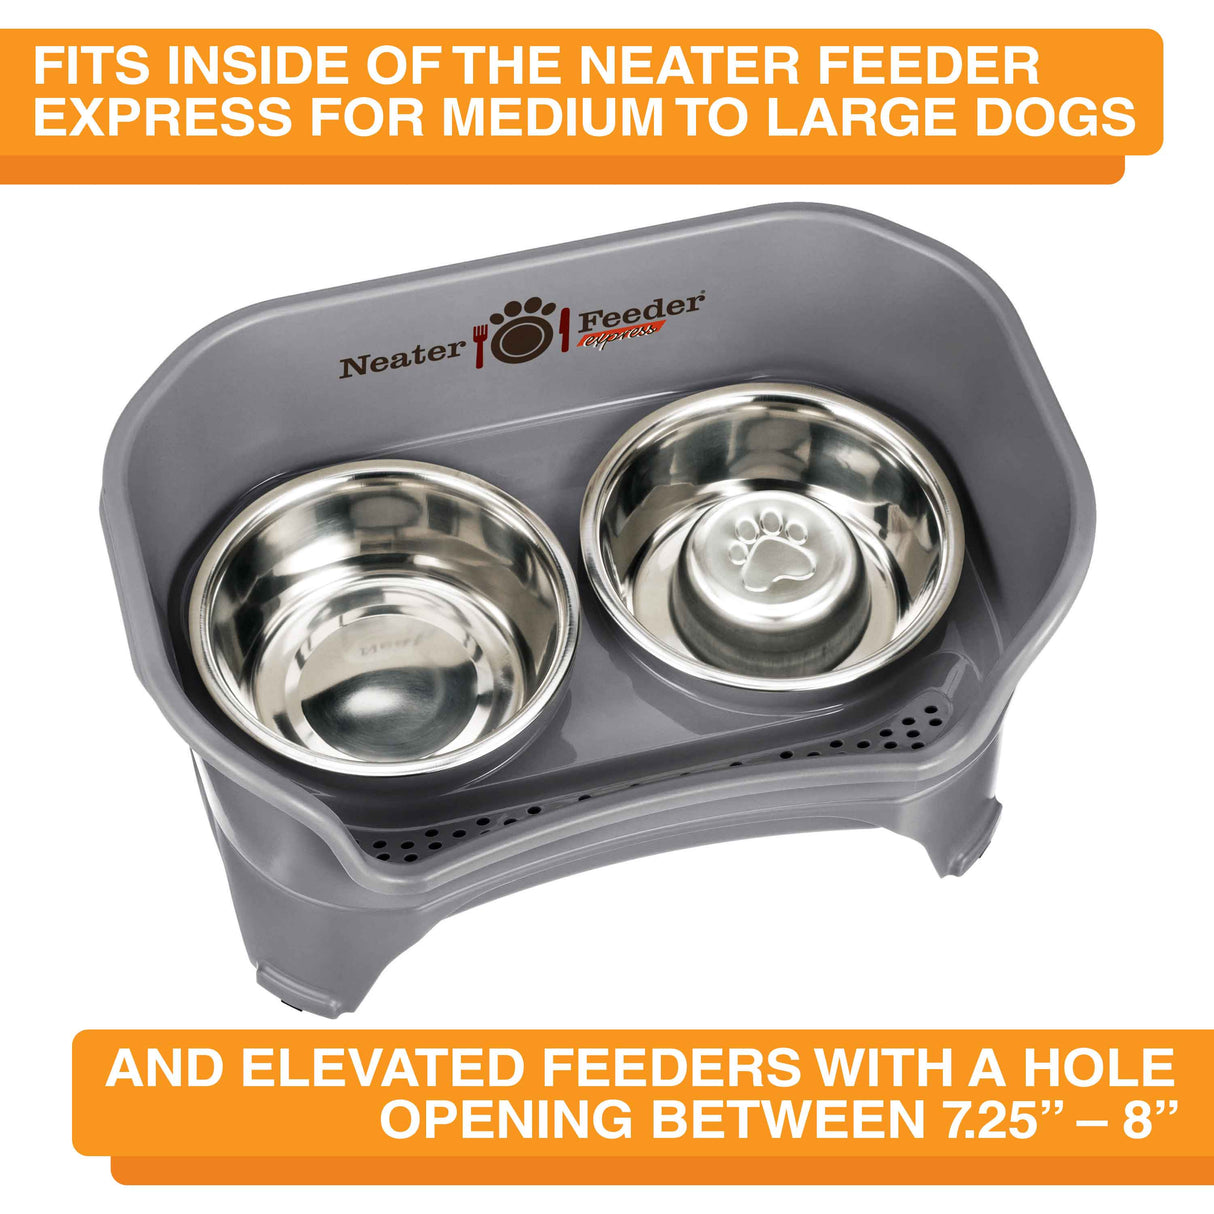 Large Stainless Steel Slow Feed Replacement Bowl for Neater Feeder inside a medium to large gunmetal gray Express Neater Feeder